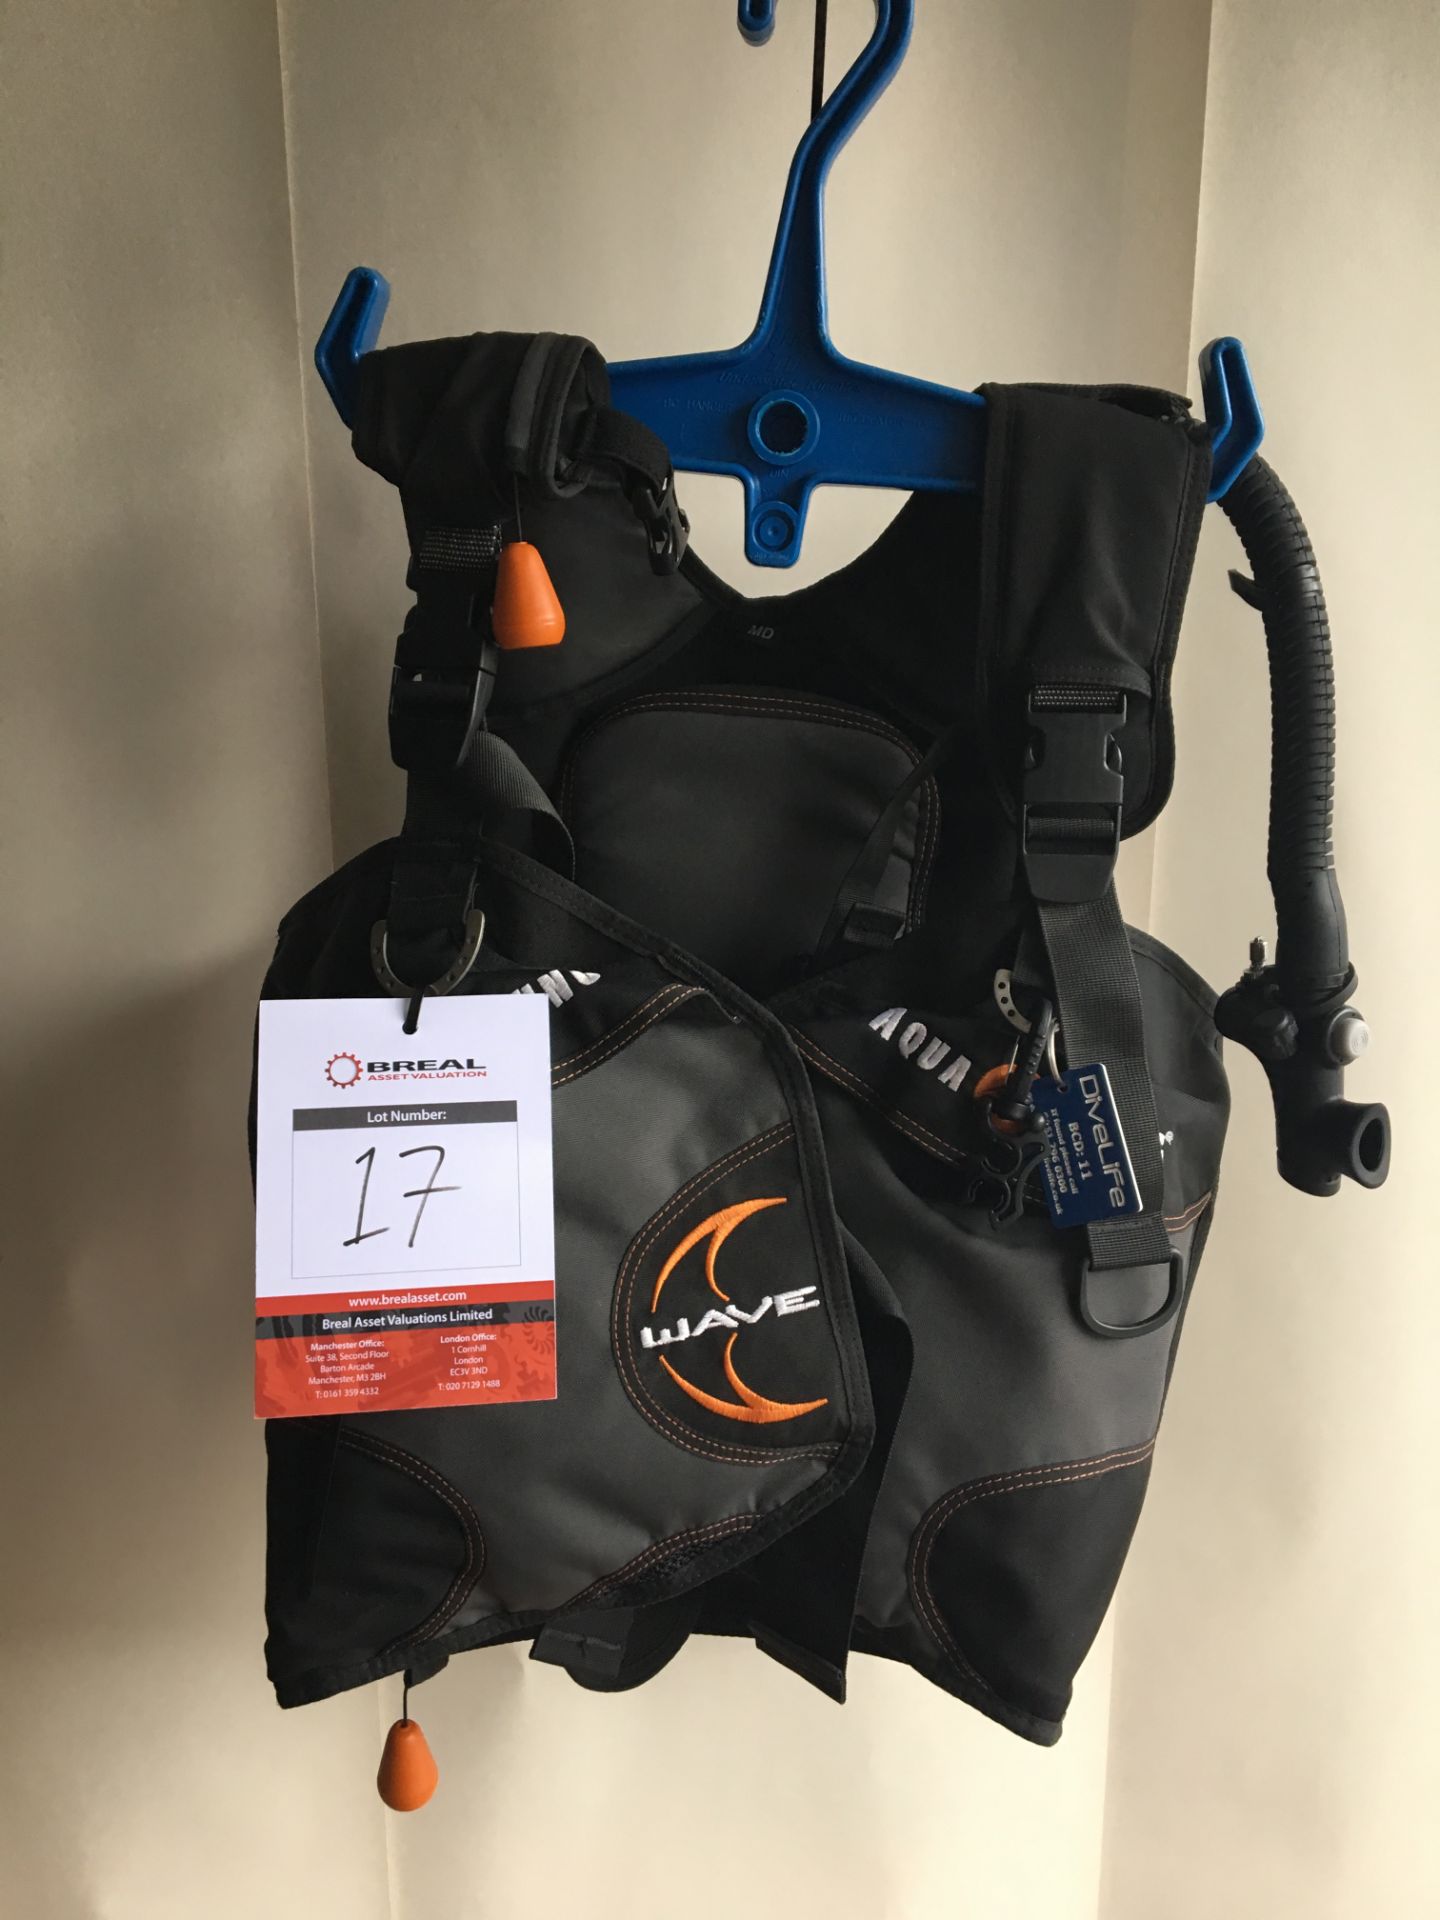 Aqua Lung Wave BCD Dive Vest in black, size M (used)